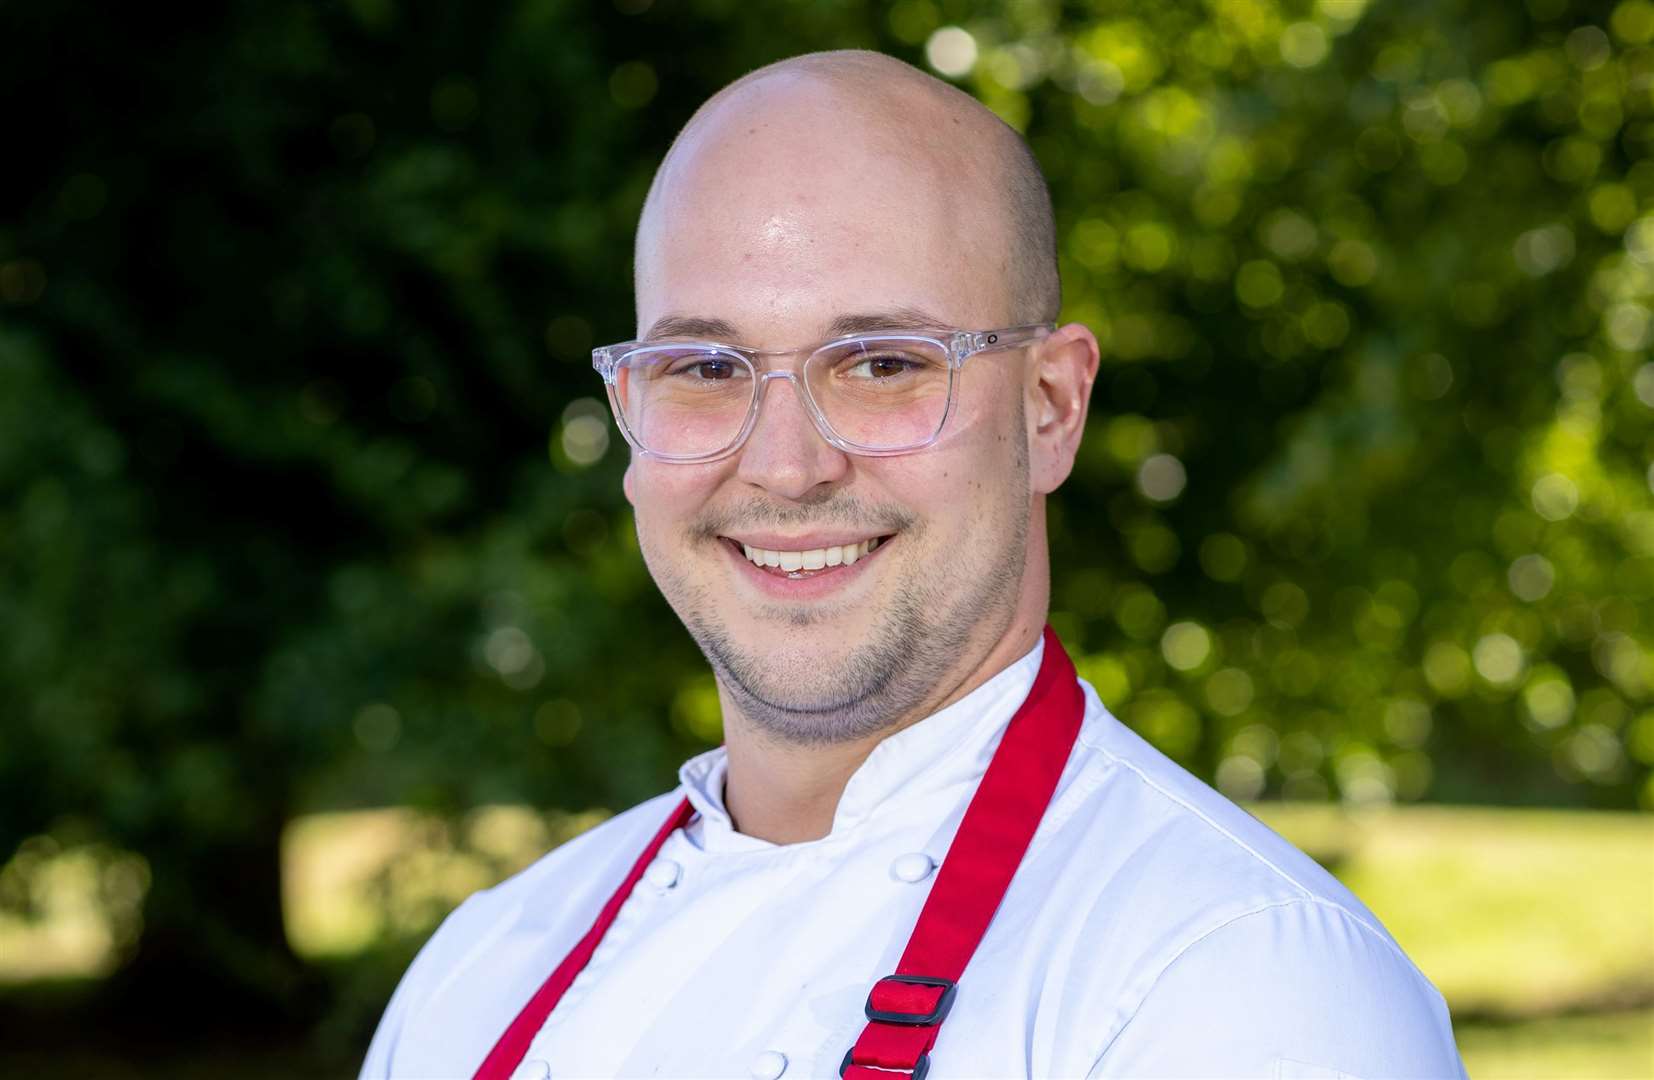 Thackeray's chef Patrick Hill is part of the brand new Chef’s Table in Calverley Grounds. Picture: Matt Walker